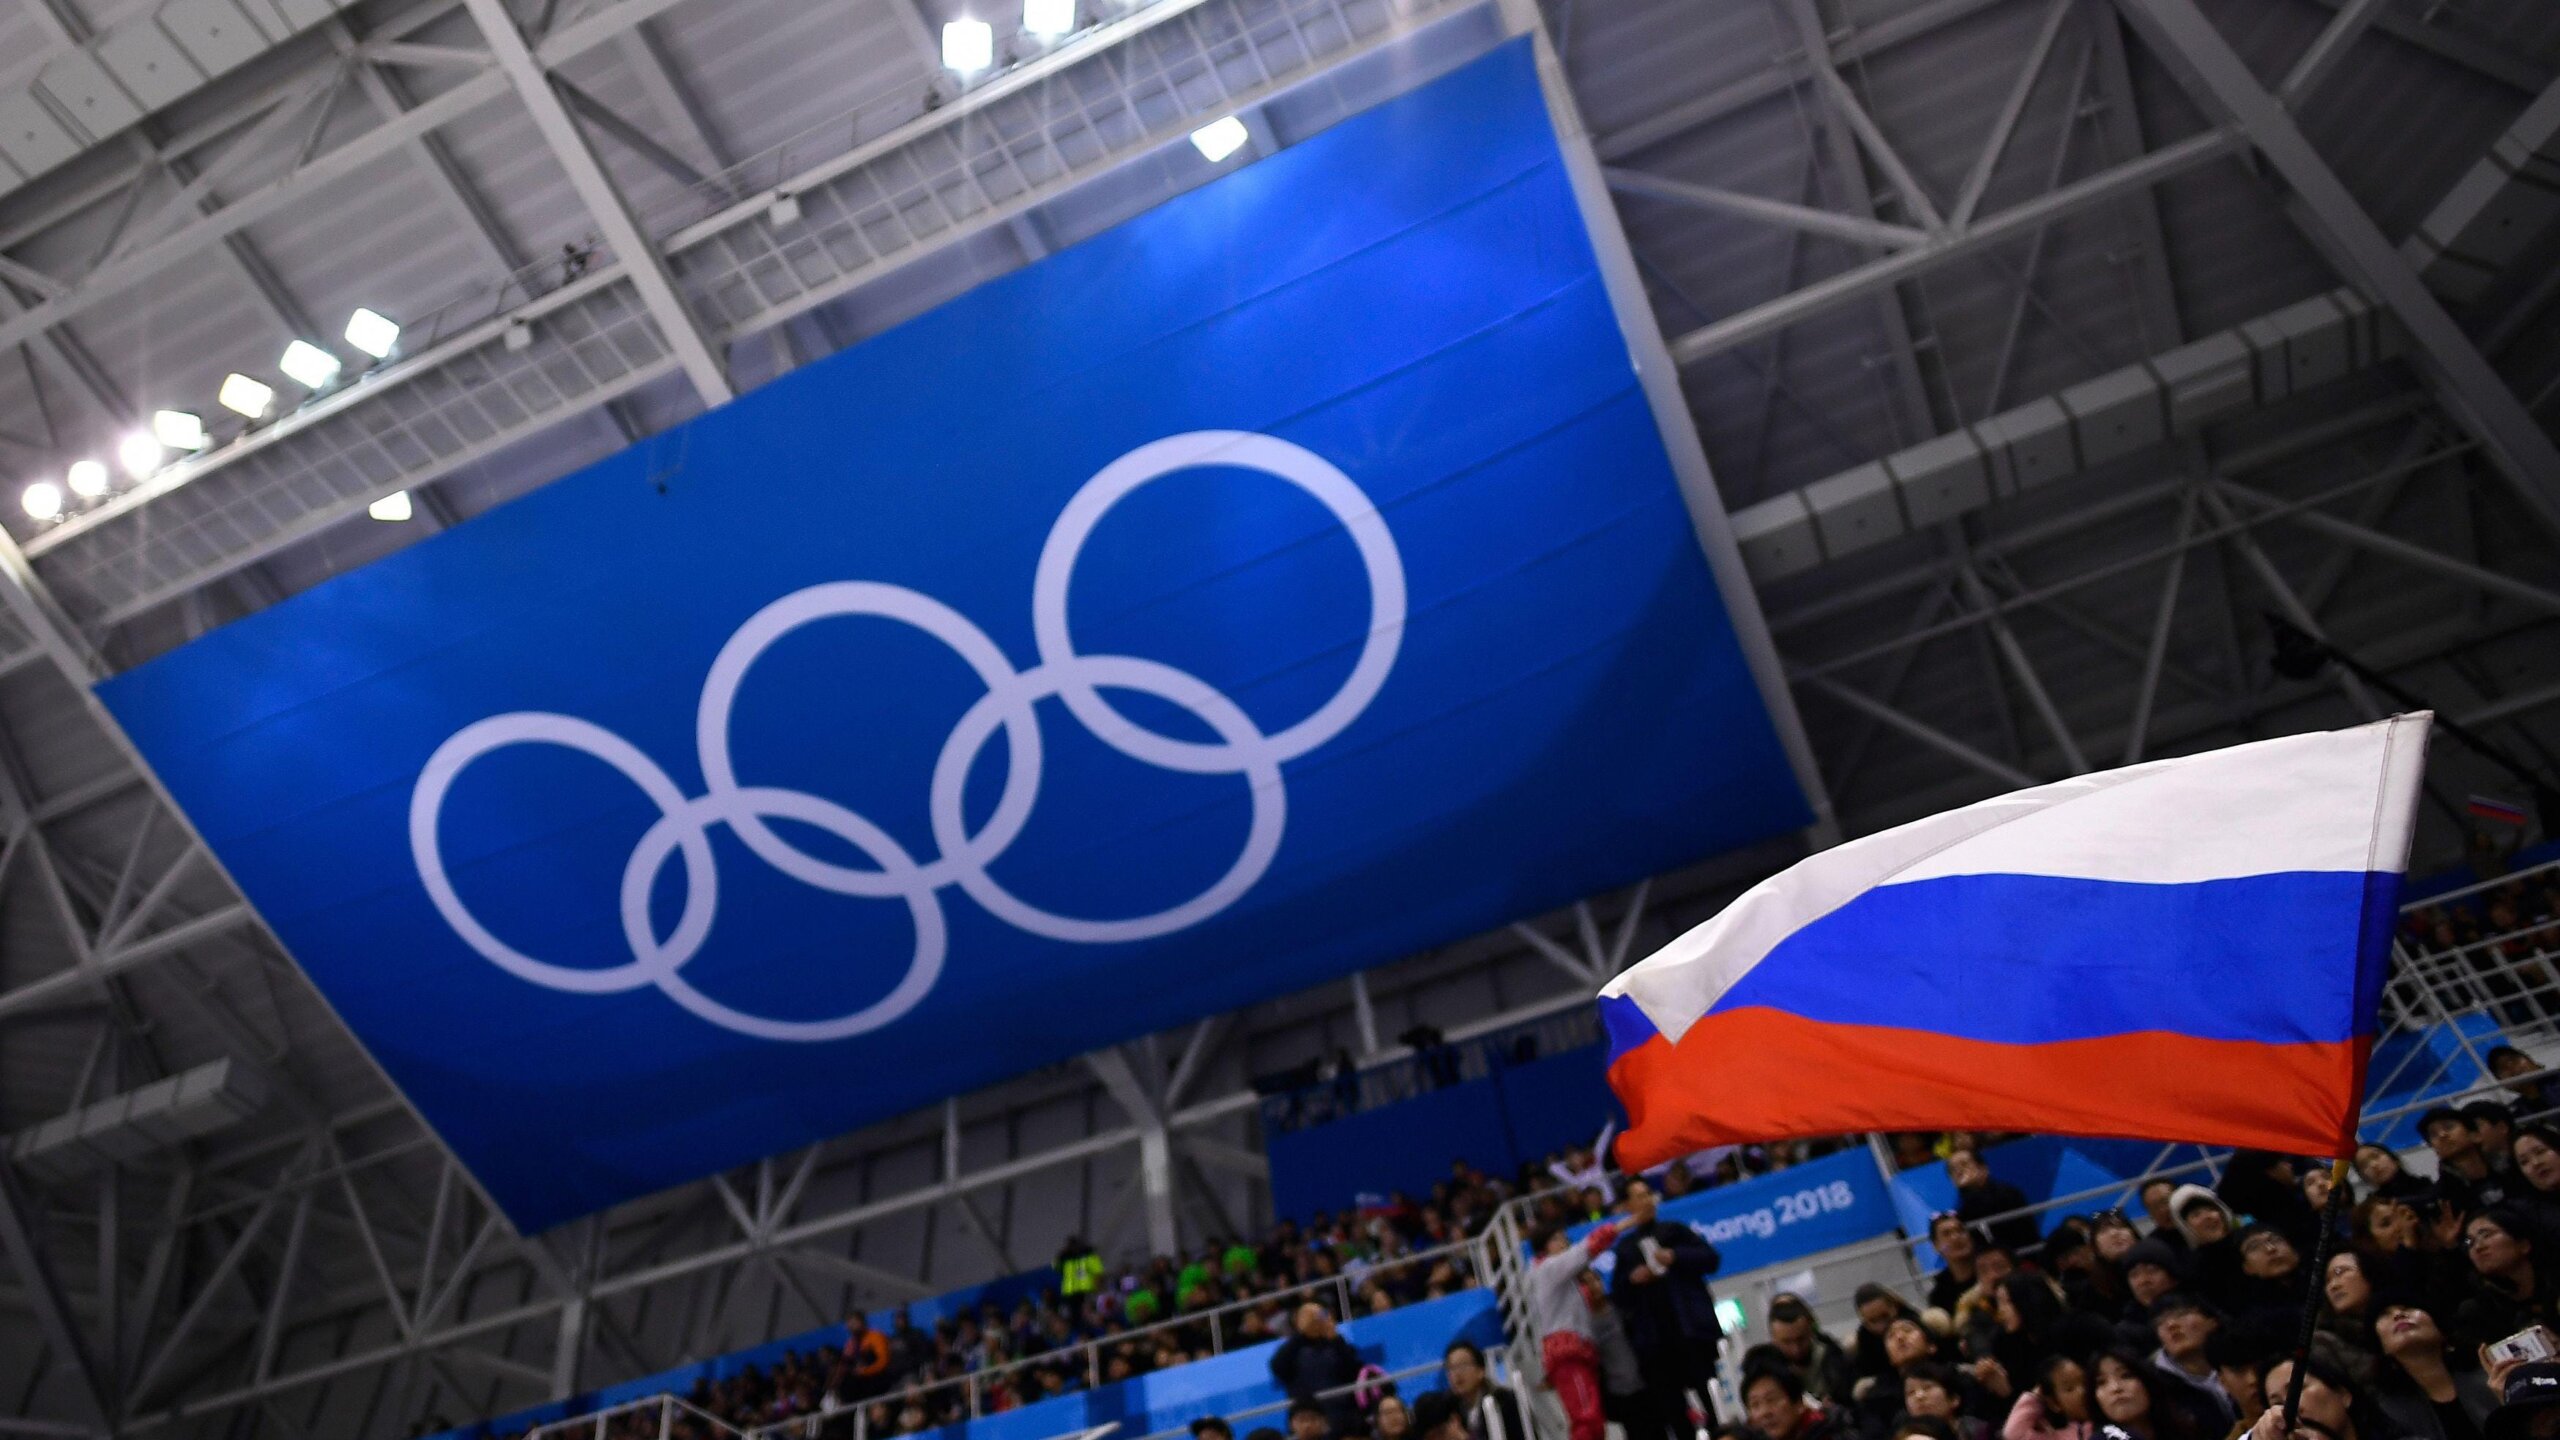 IOC: Russian And Belarusian Athletes Have to Be Banned From All Global Sports After Ukraine Invasion